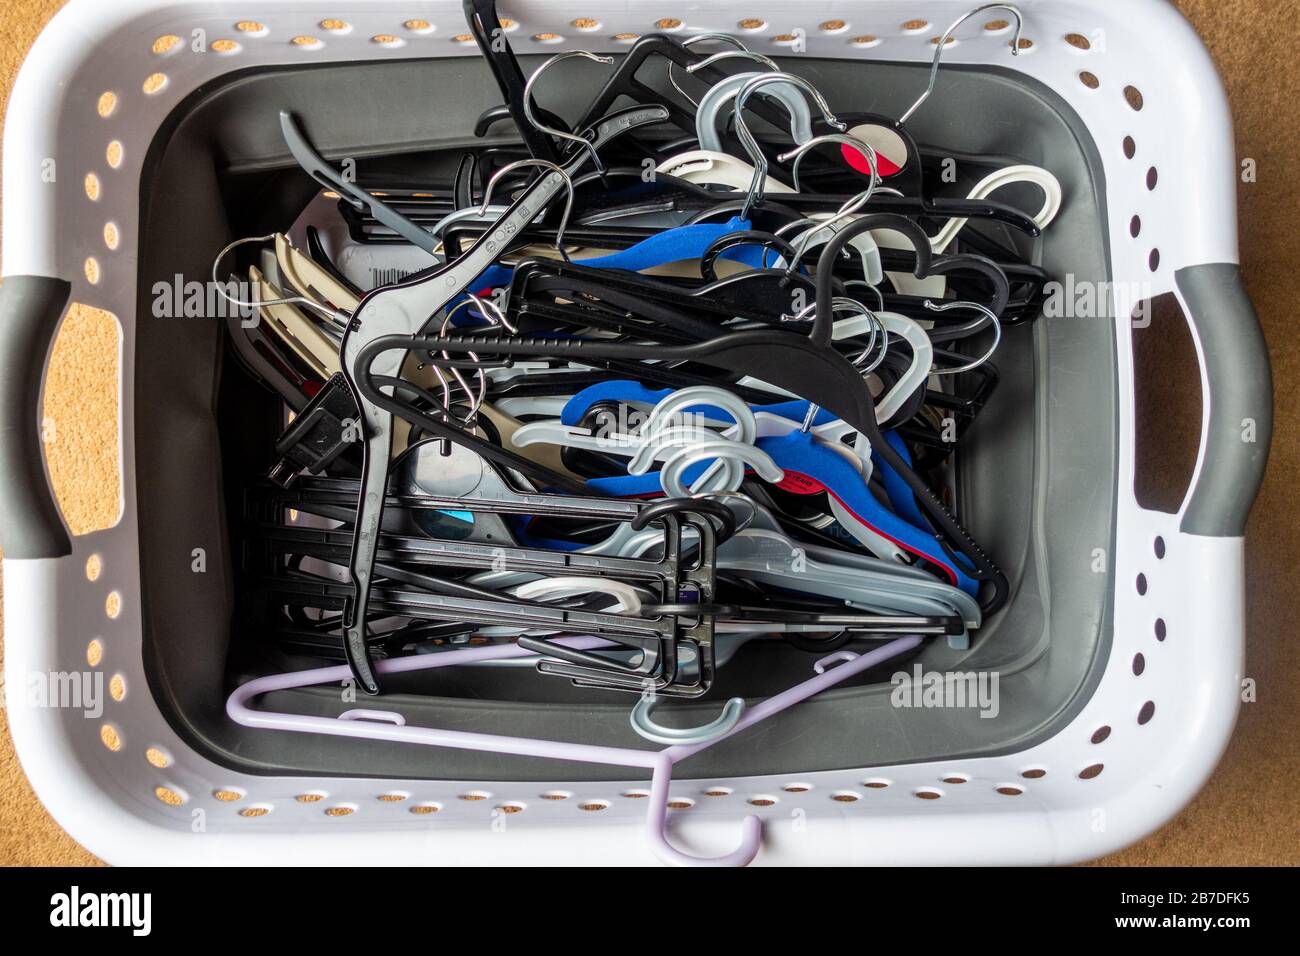 Looking down at a laundry basket full of plastic coat hangers. Stock Photo